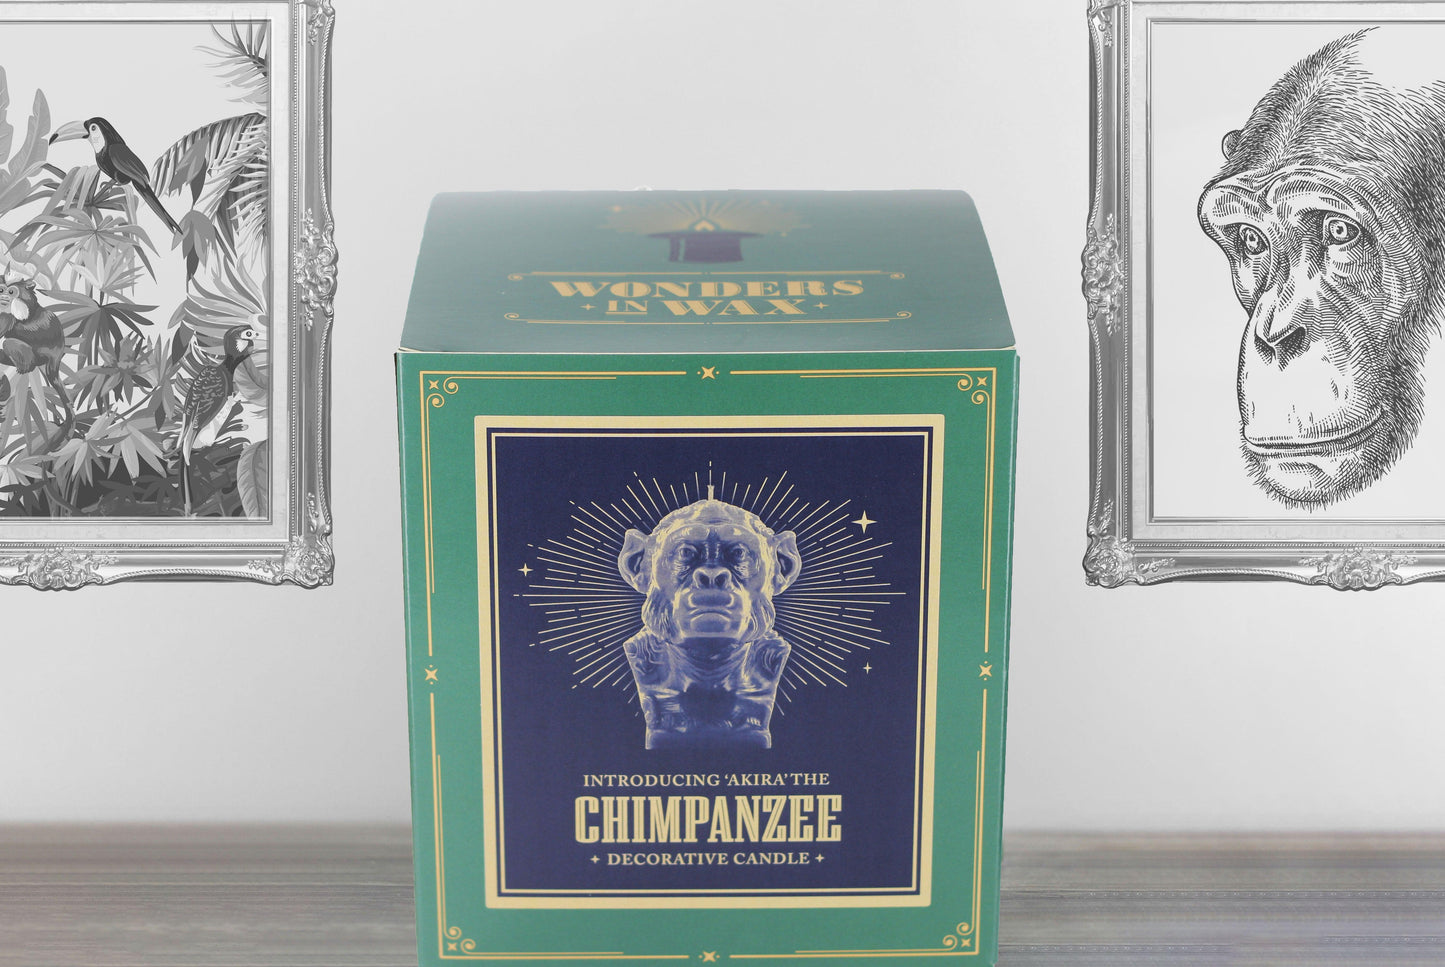 Retail Box Packaging for Large 3D Chimpanzee Bust Candle in Tropical Green Colour, Handmade by Wonders in Wax in Poole, England.